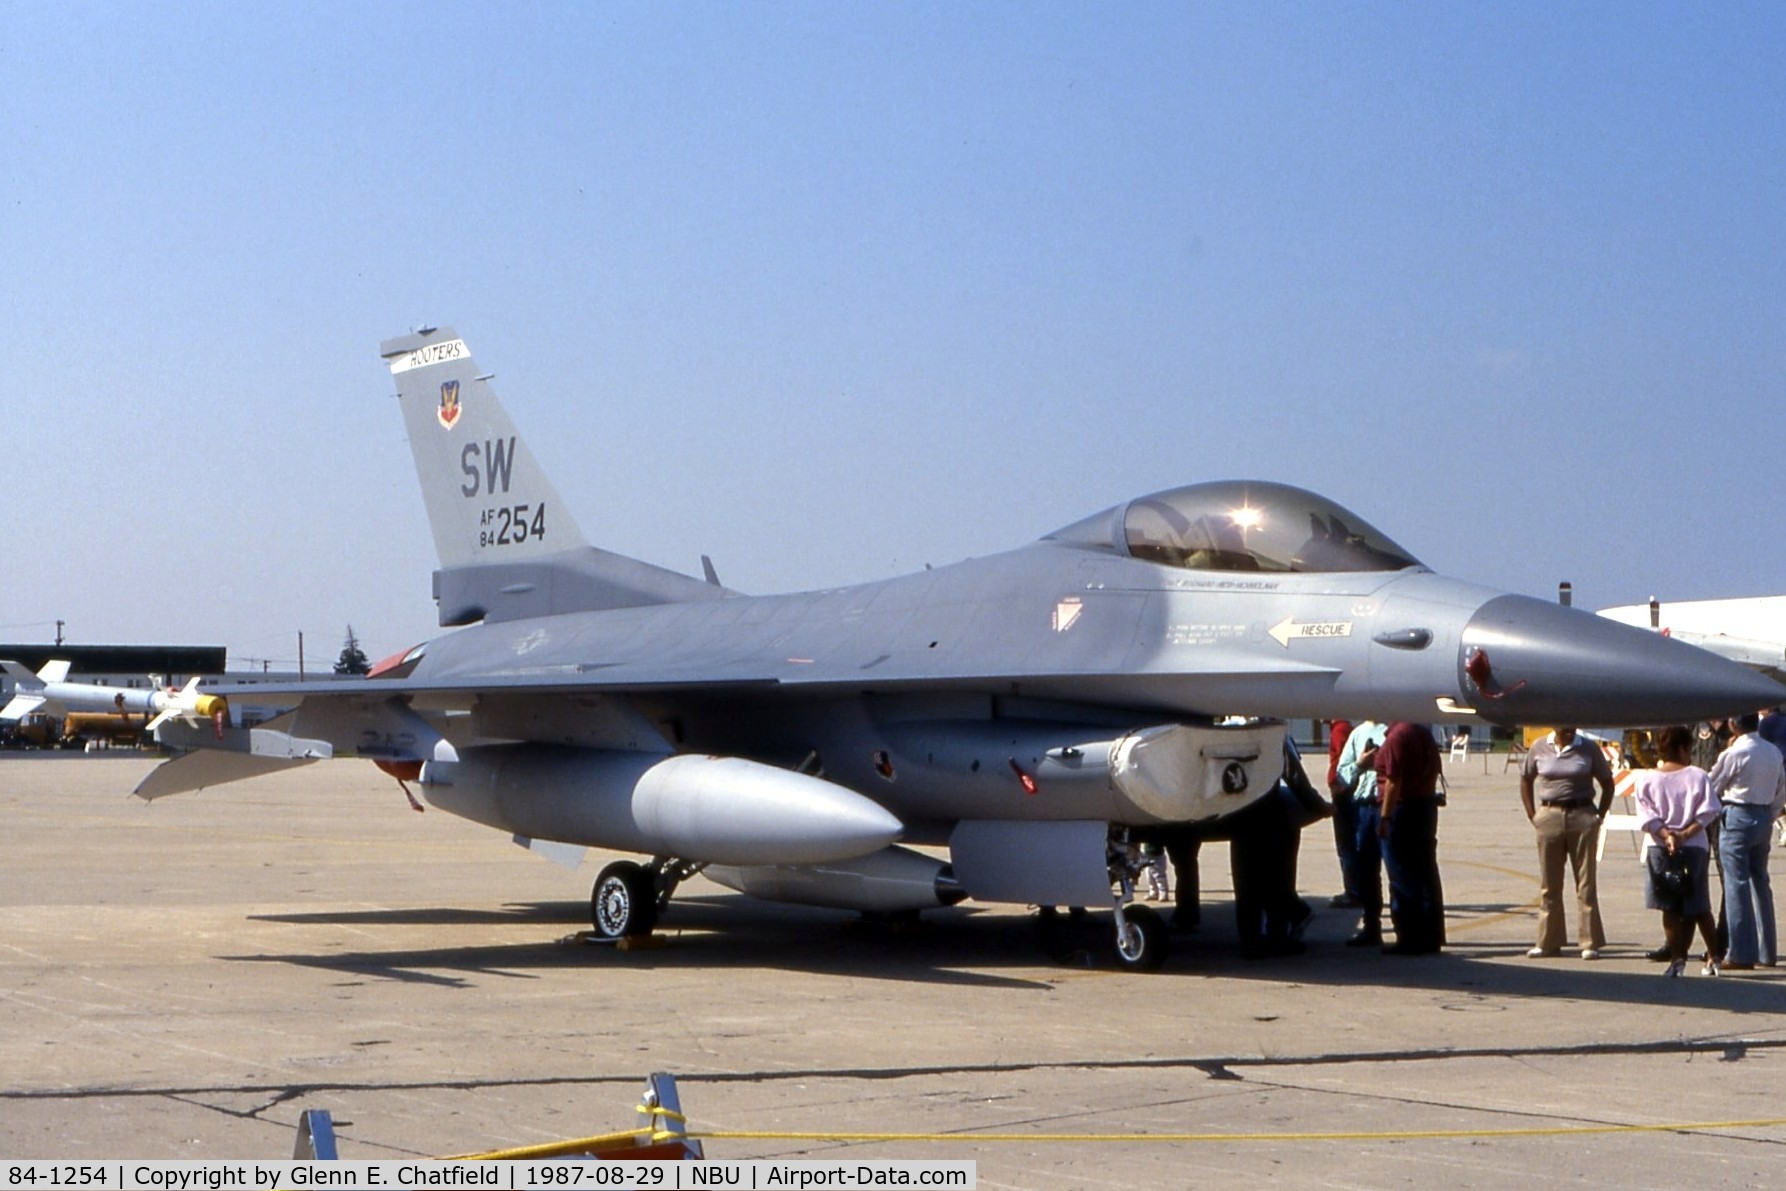 84-1254, 1984 General Dynamics F-16C Fighting Falcon C/N 5C-91, F-16C at the open house